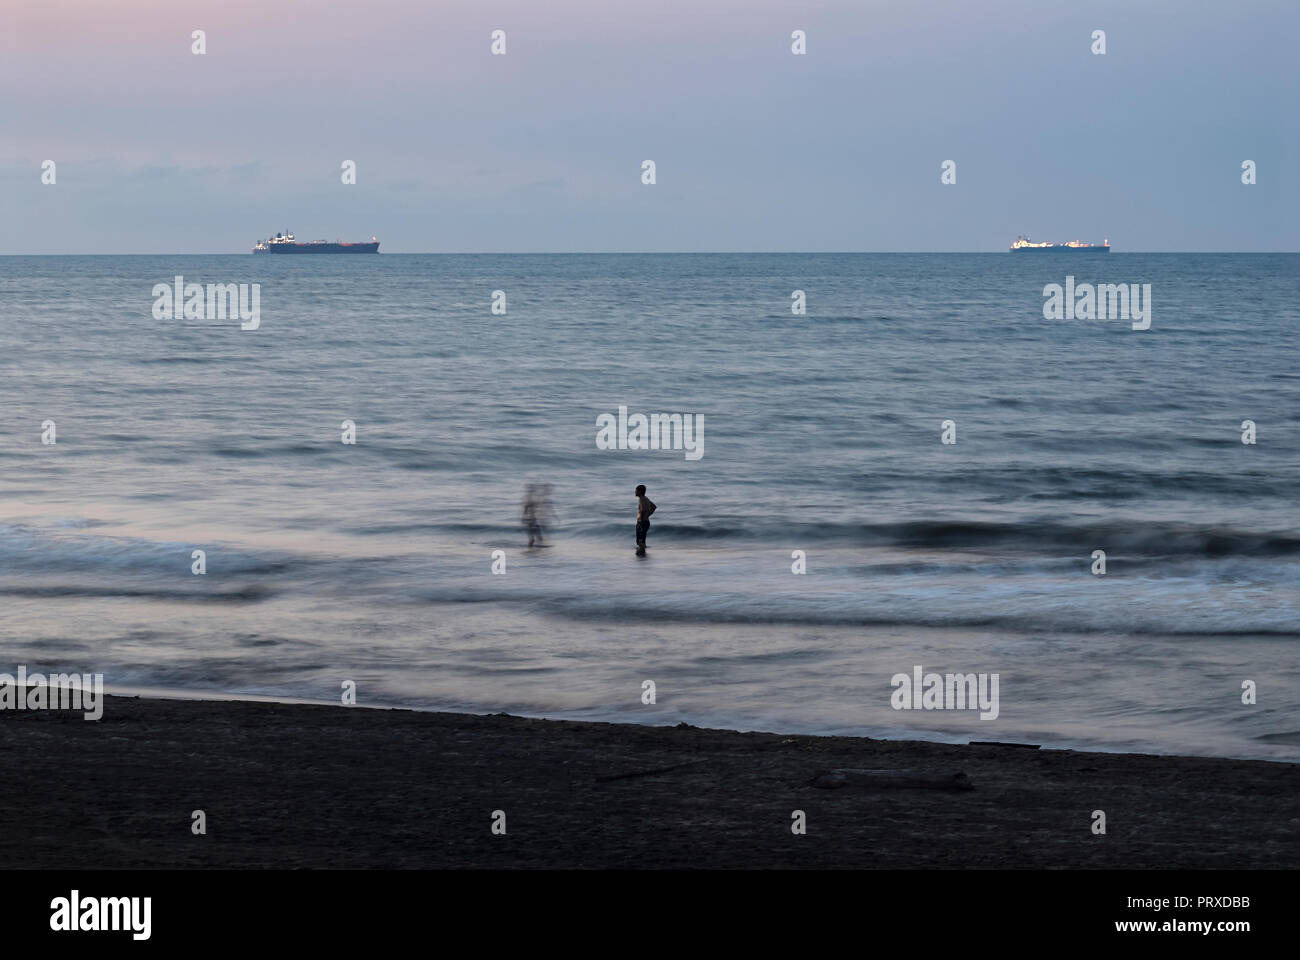 COATZACOALCOS, VER/MEXICO - SEPT 1st, 2018: Two man enjoy a dip at the beach during sunset. Oil tanker ships await entrance to the logistics terminal. Stock Photo